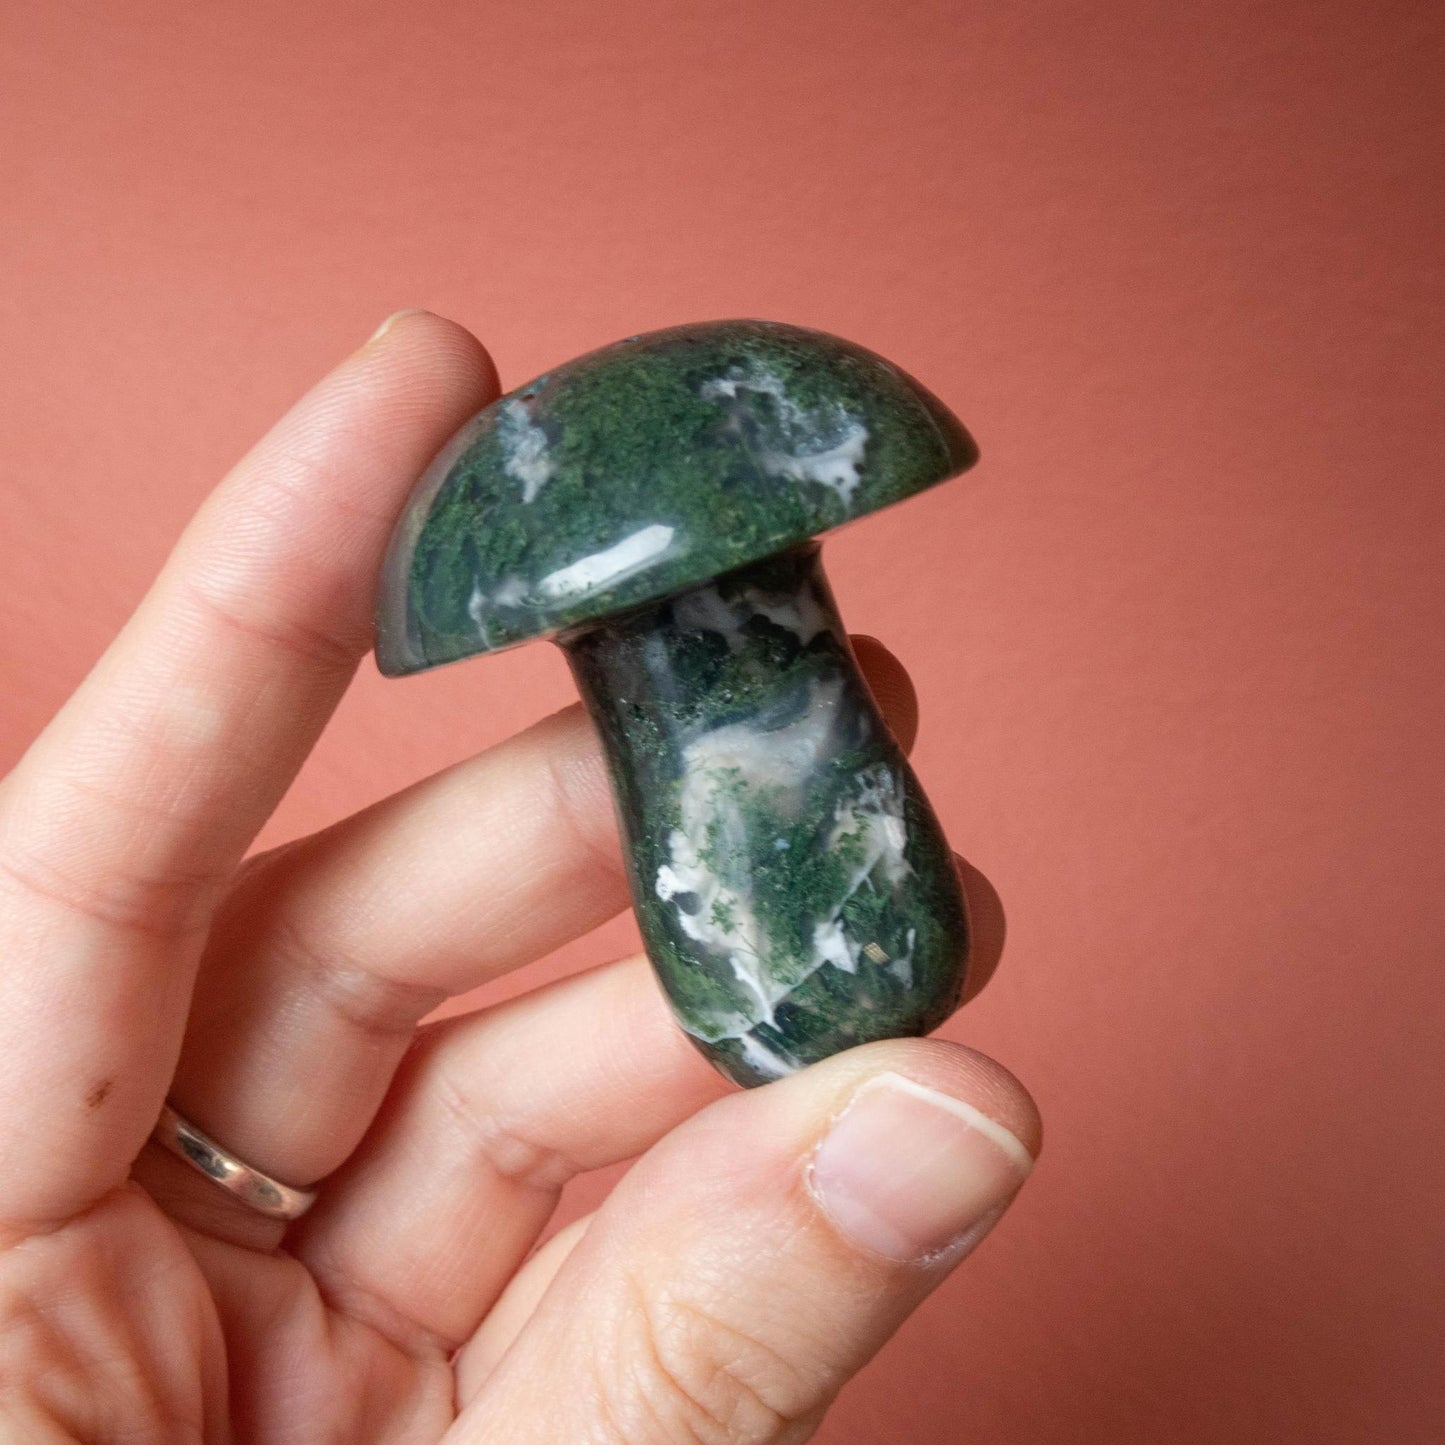 moss agate, moss agate mushroom, crystal mushroom, moss agate crystal, moss agate stone, moss agate properties, moss agate healing properties, moss agate meaning